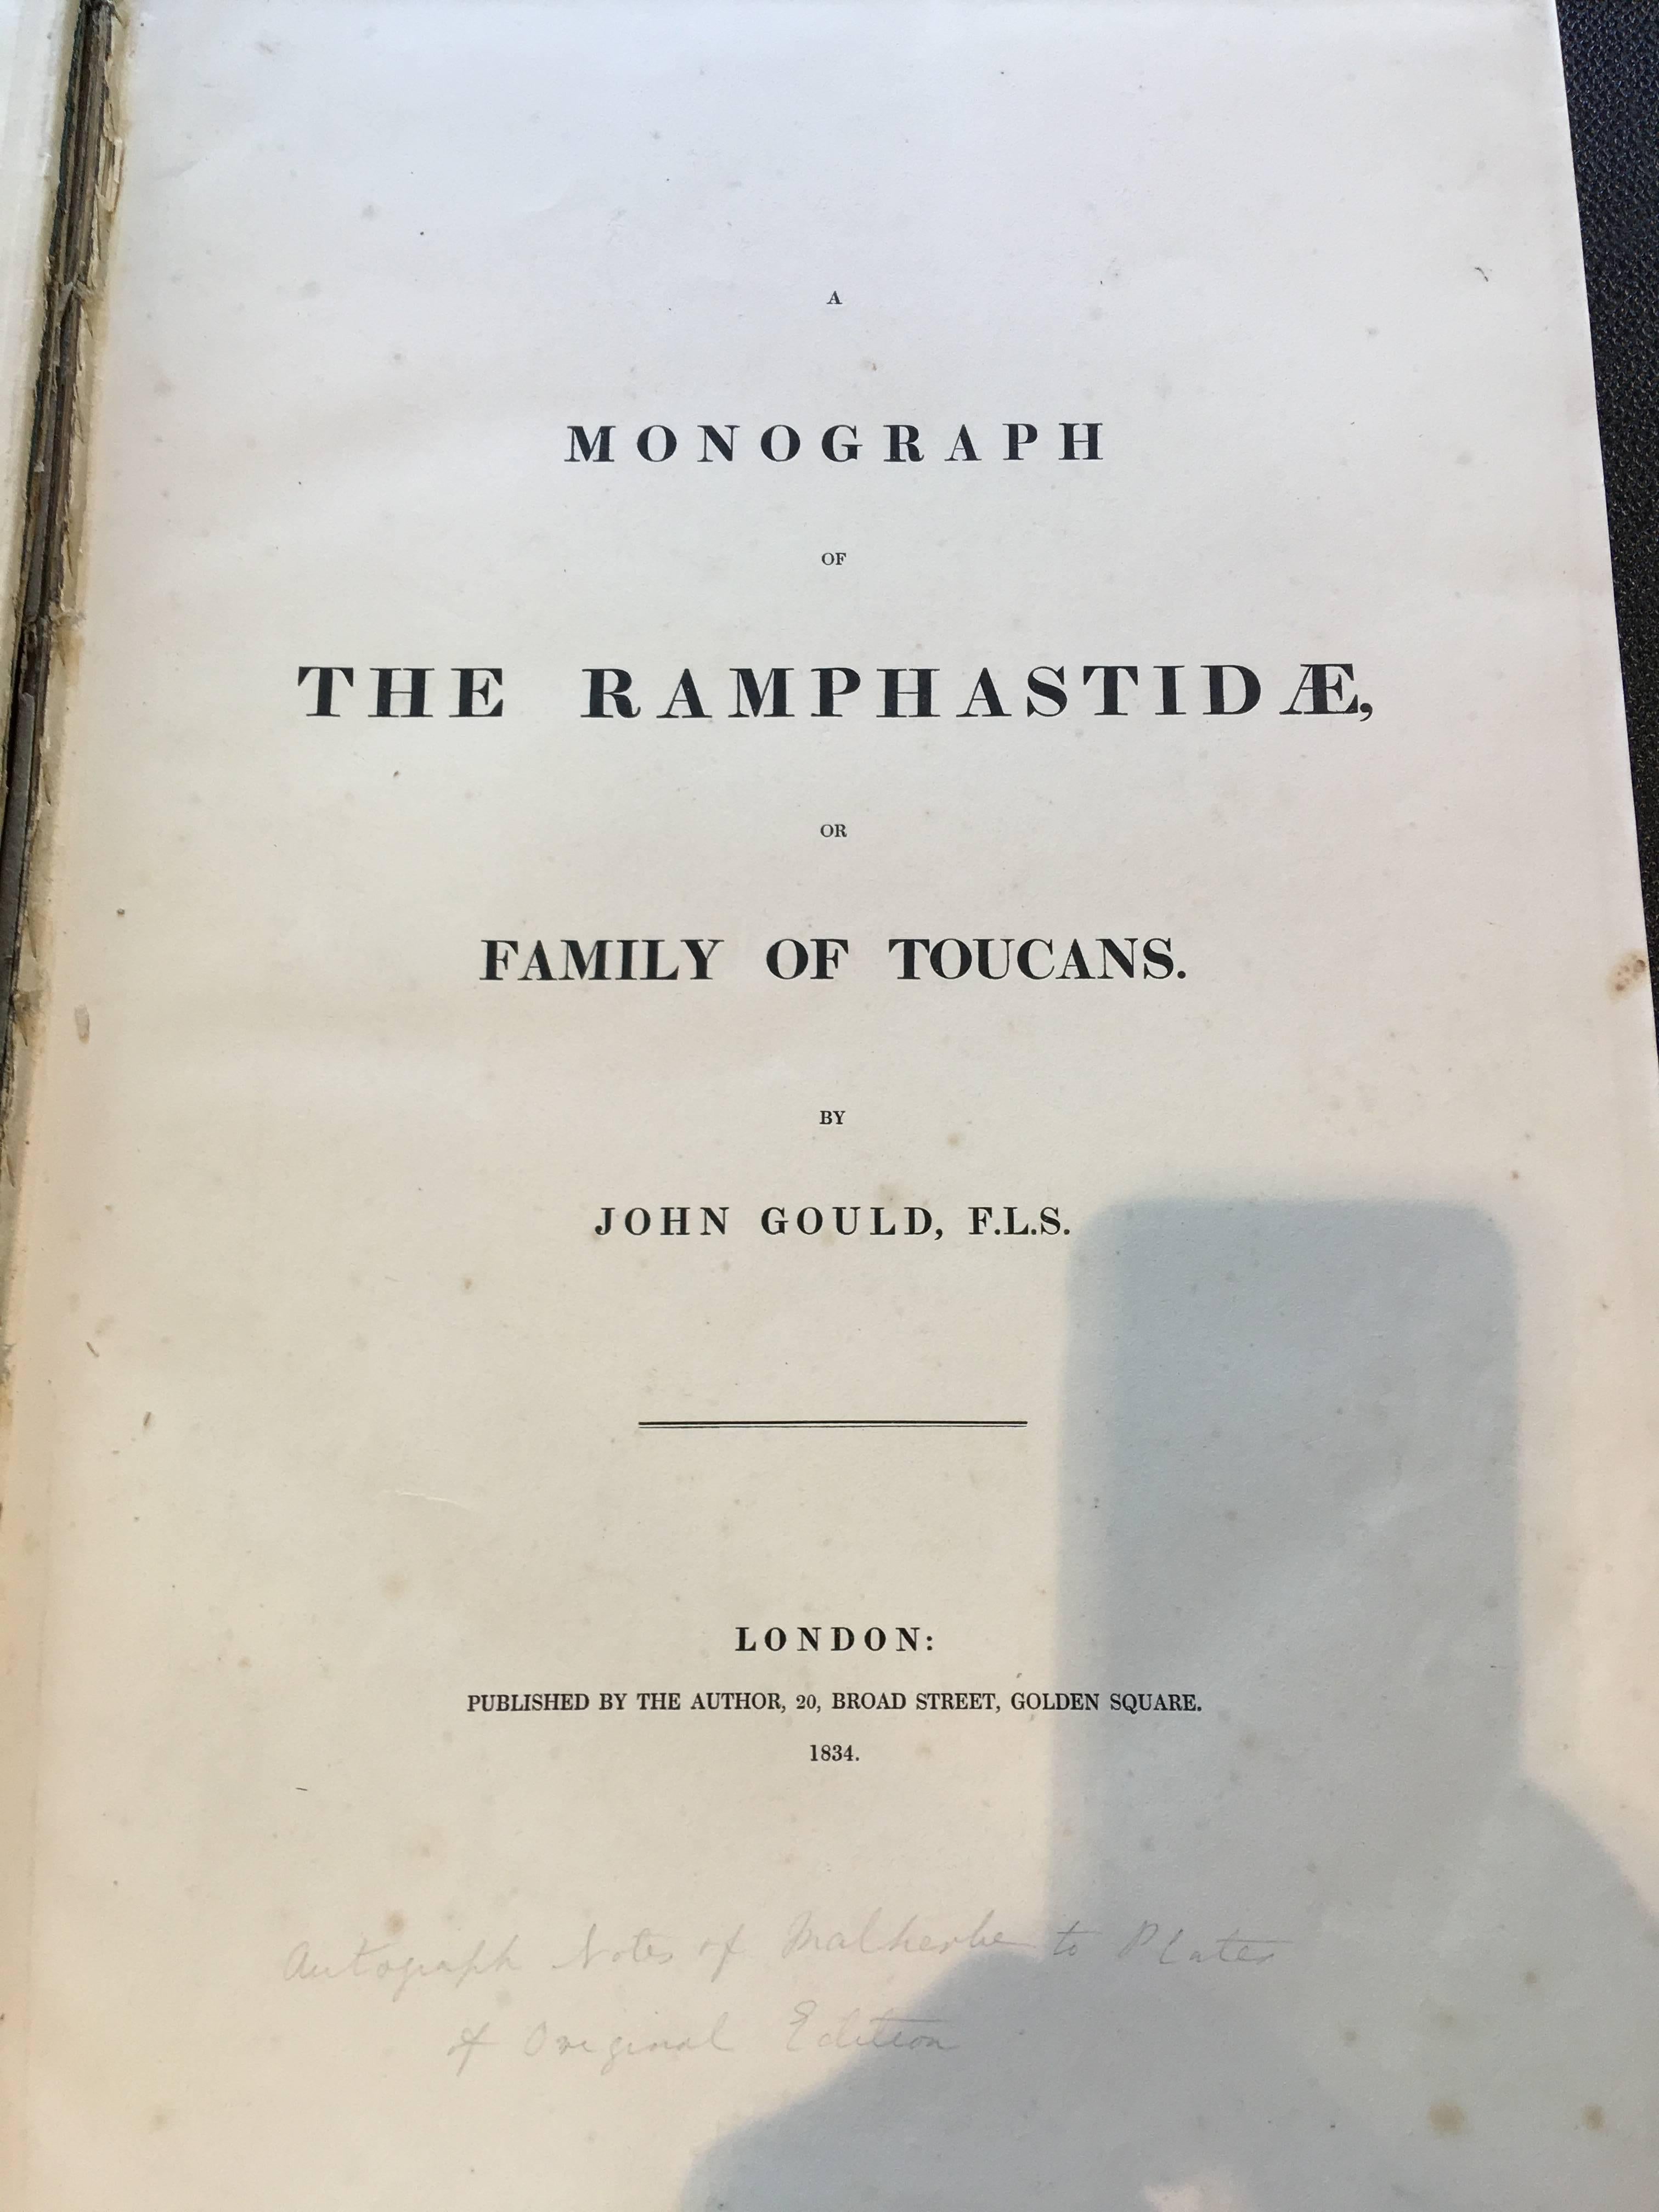 Gould Monograph of the Ramphastide 1st edition book in Modern Display Case 4